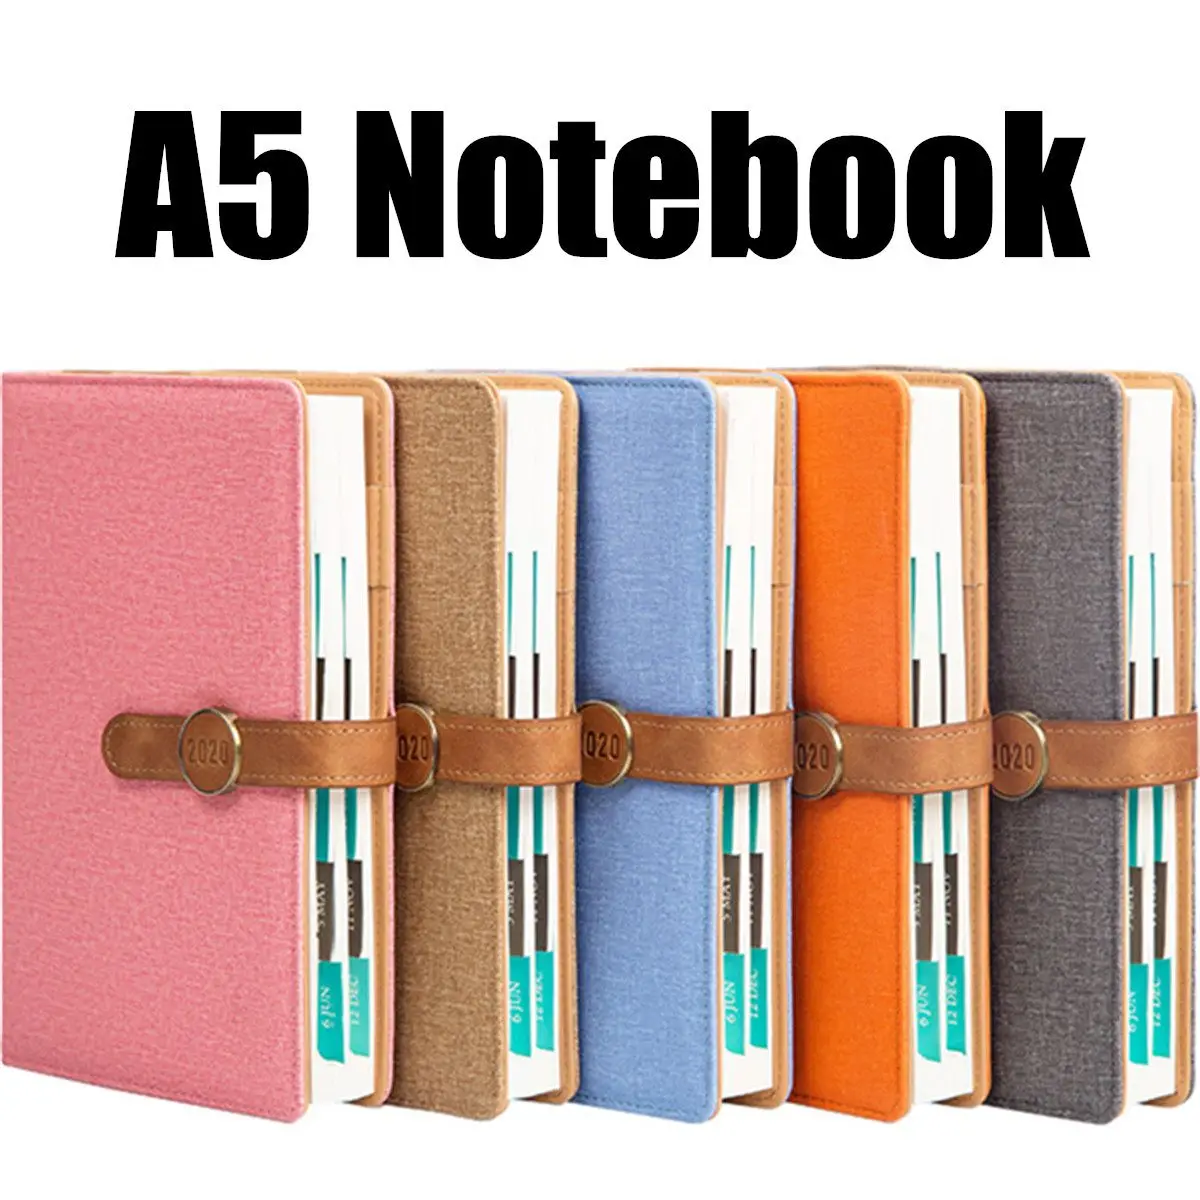 

Latest Agenda A5 Soft Cover Spiral Ring Planner Notebook Hardcover Notebook Weekly Schedule Leather Agenda Diary Notebook